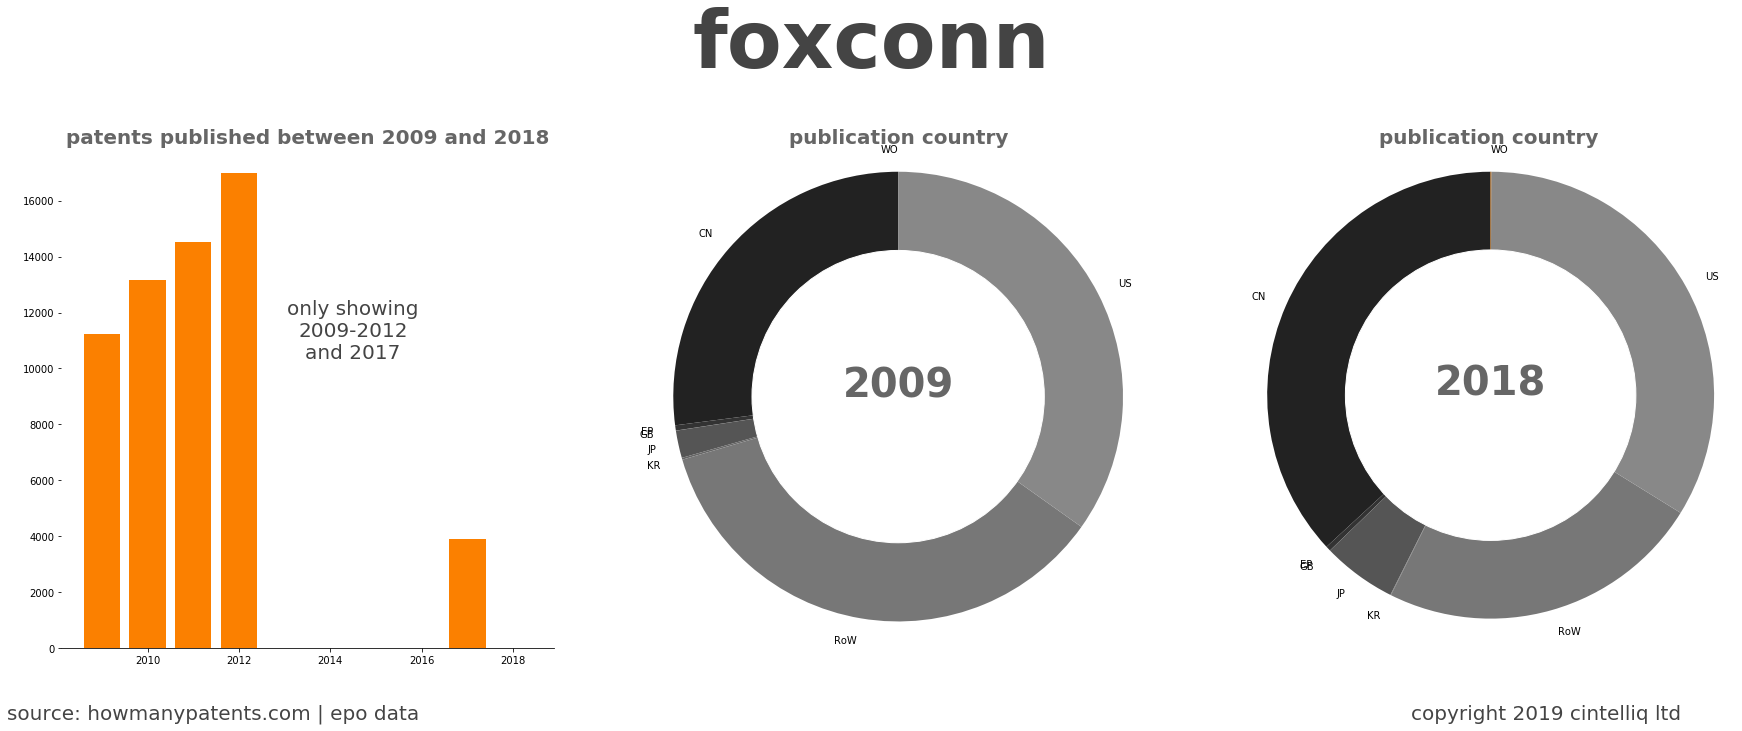 summary of patents for Foxconn